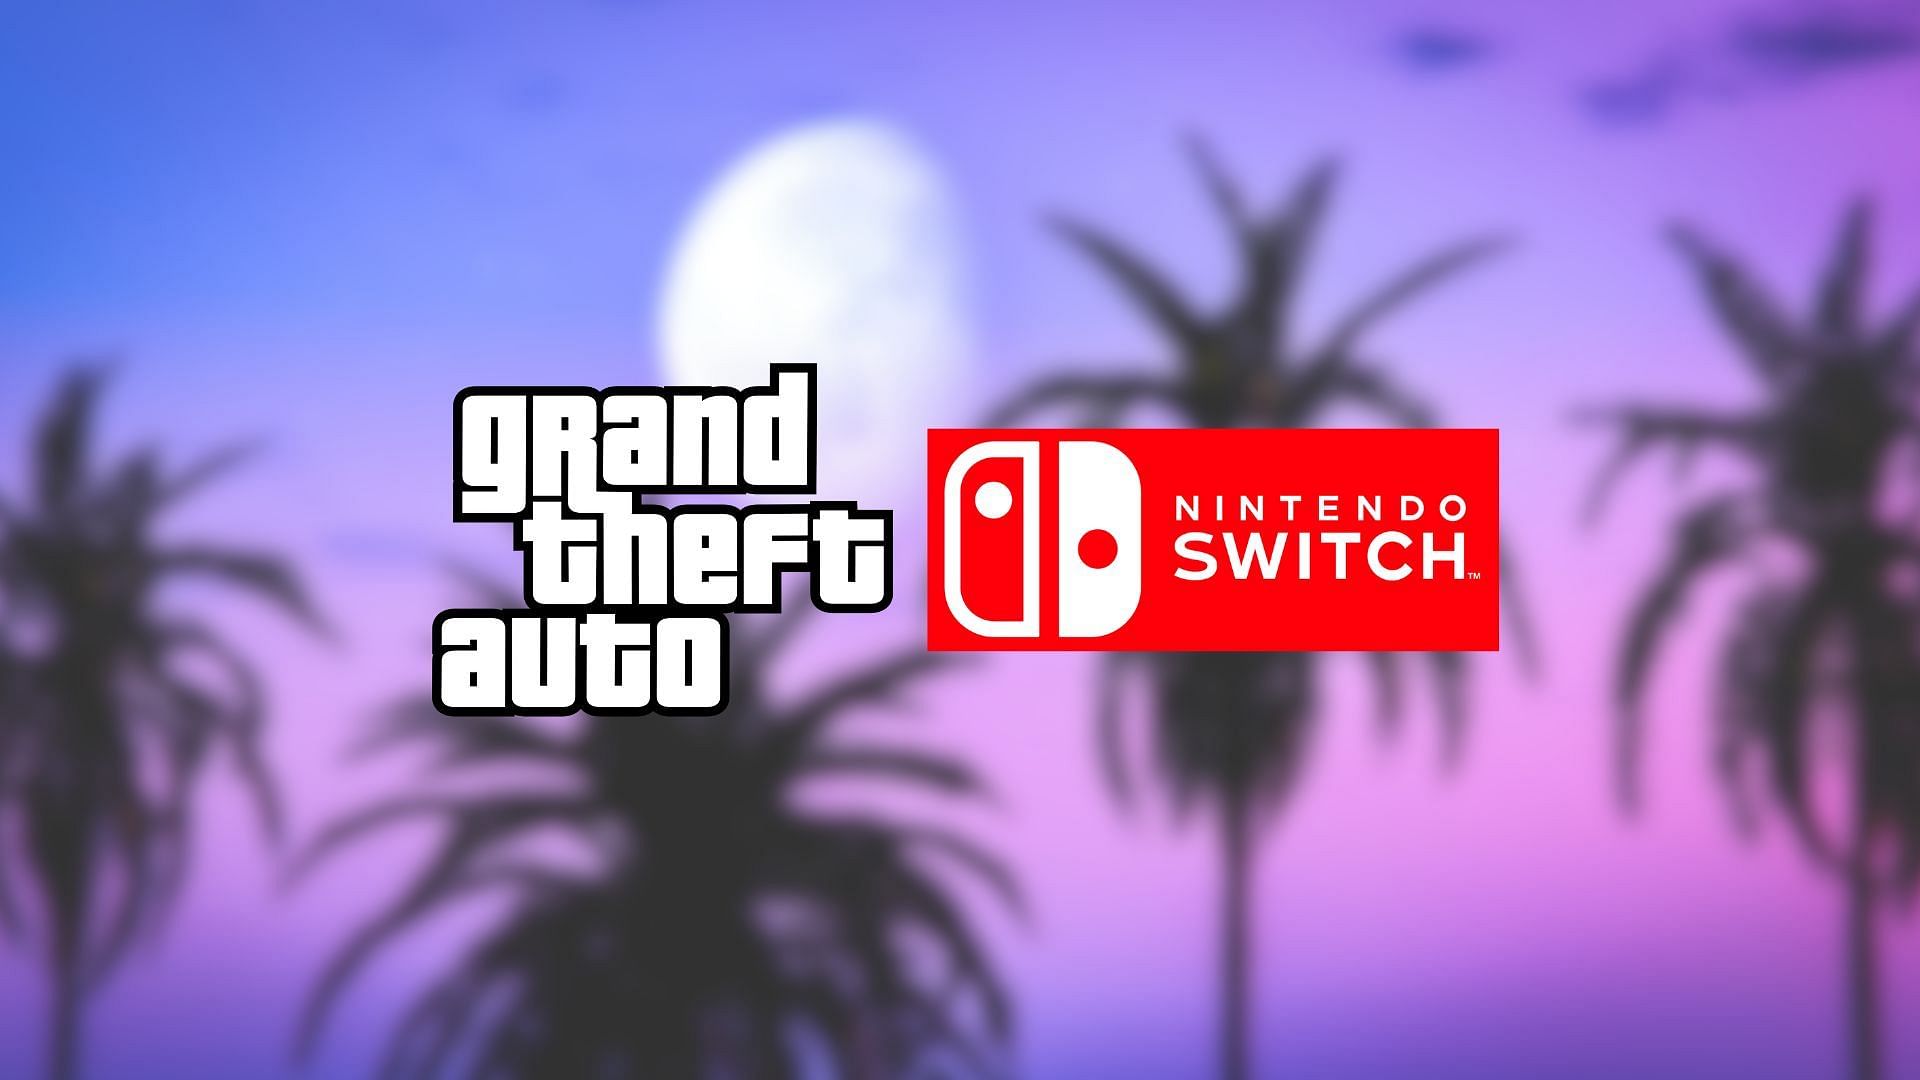 Nintendo Switch 2 should have a new GTA game instead of old ports (Image via X/@Basi_jp)